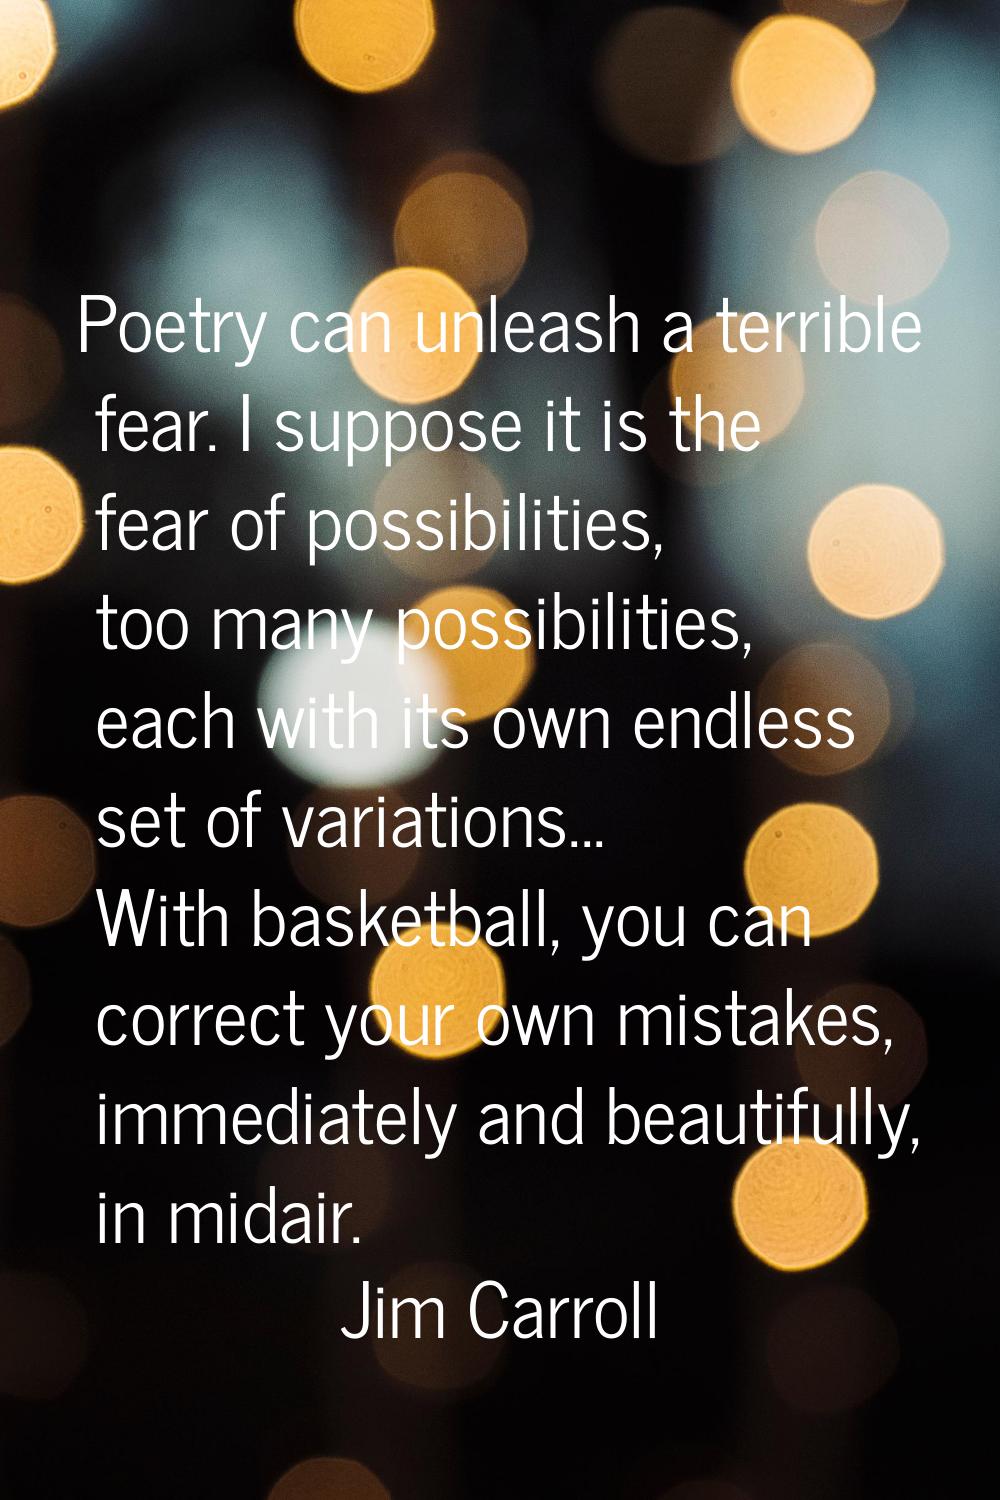 Poetry can unleash a terrible fear. I suppose it is the fear of possibilities, too many possibiliti